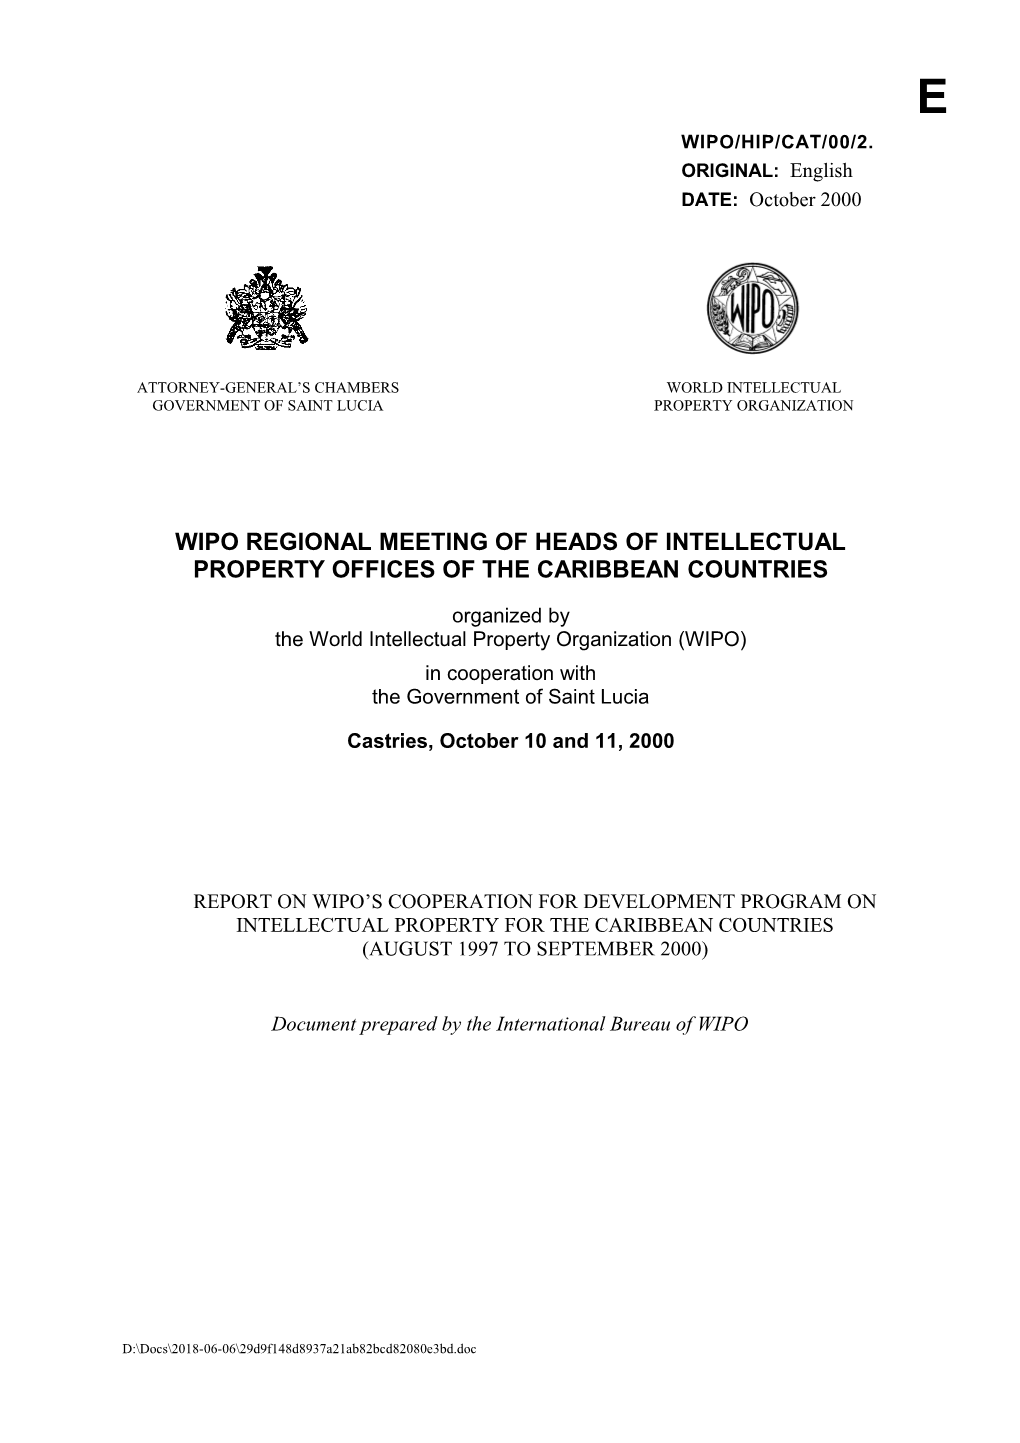 WIPO/HIP/CAT/00/2: Report on WIPO's Cooperation for Development Program on Intellectual